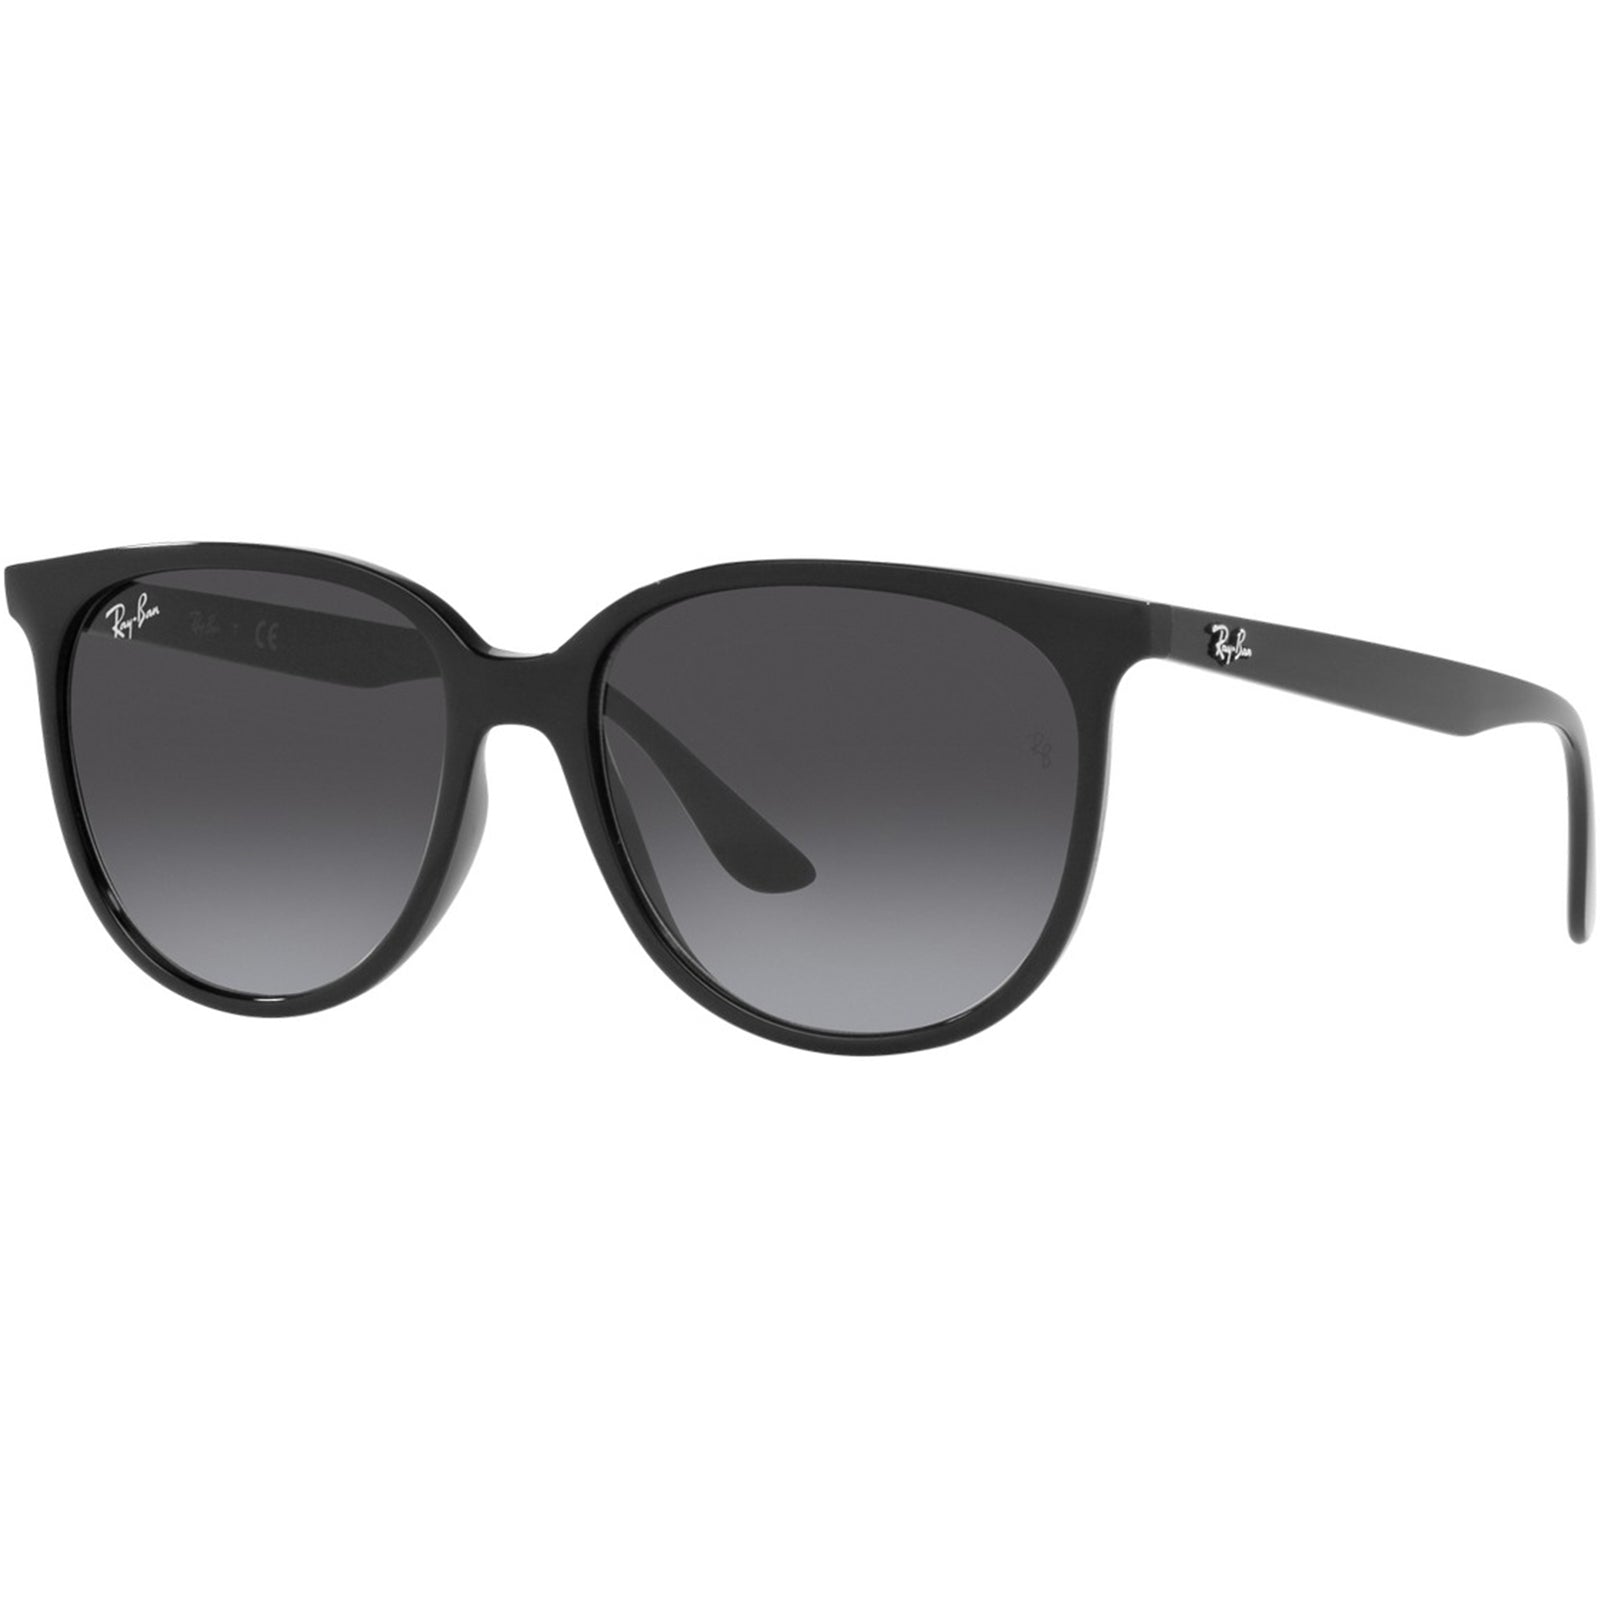 Ray-Ban RB4378 Women's Lifestyle Sunglasses-0RB4378